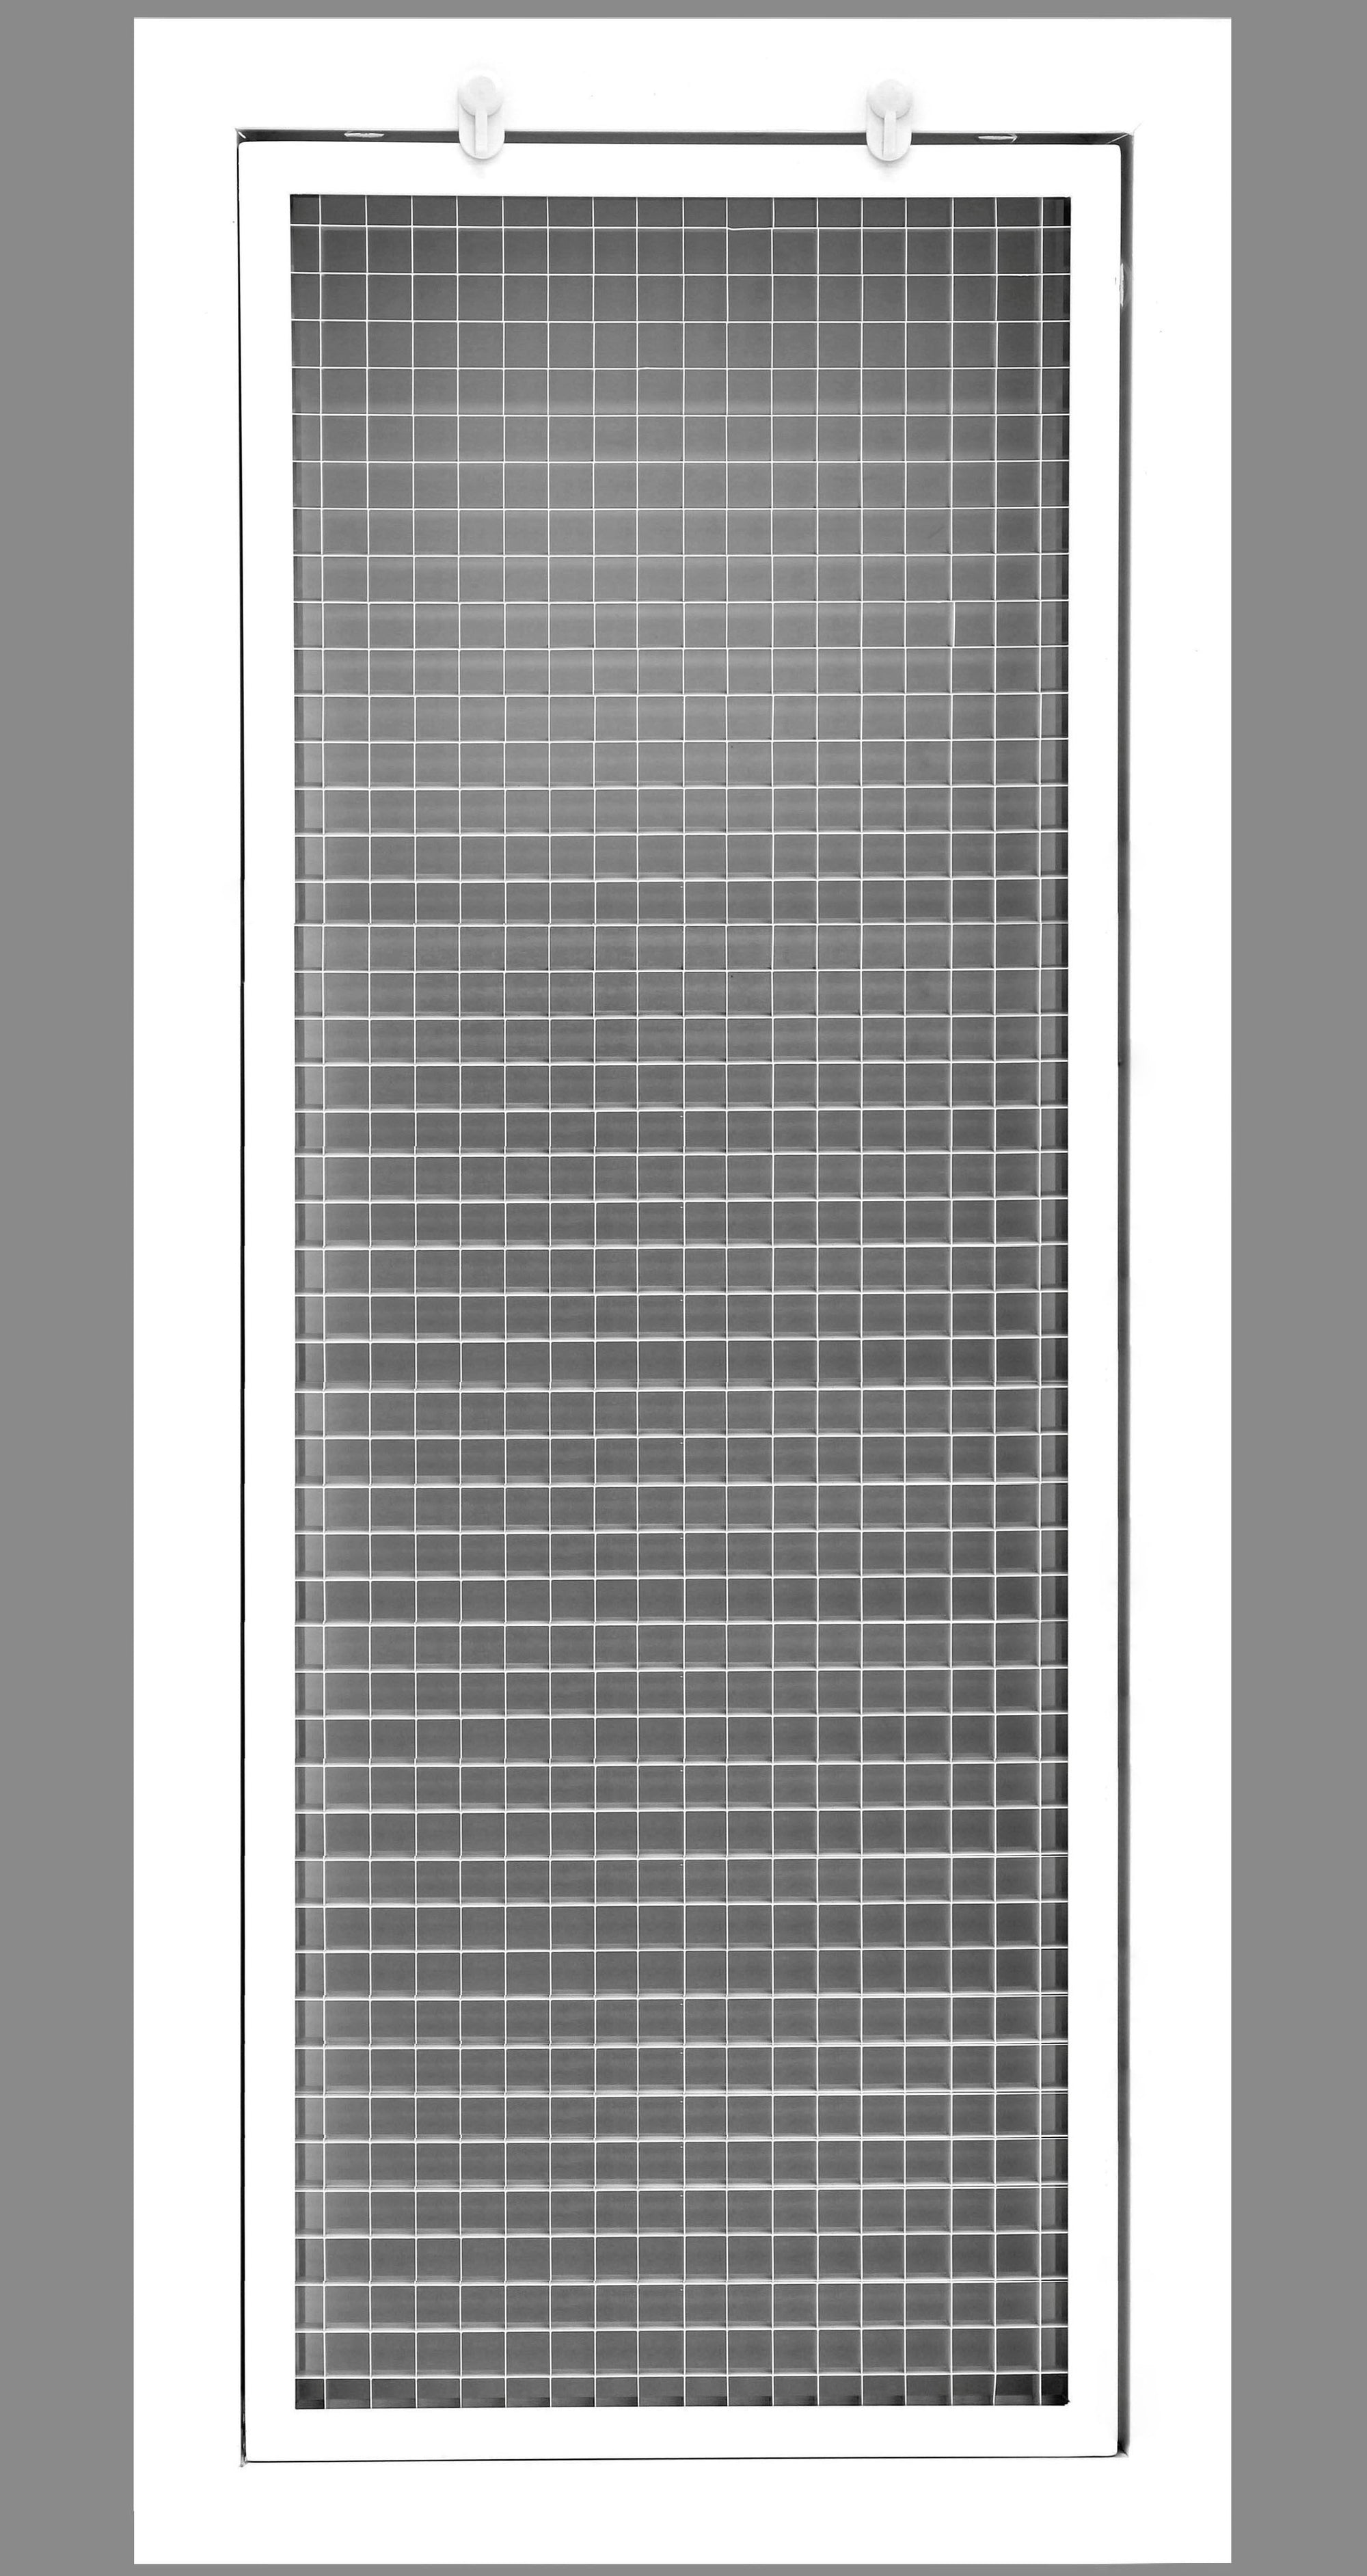 6" x 34" Cube Core Eggcrate Return Air Filter Grille for 1" Filter